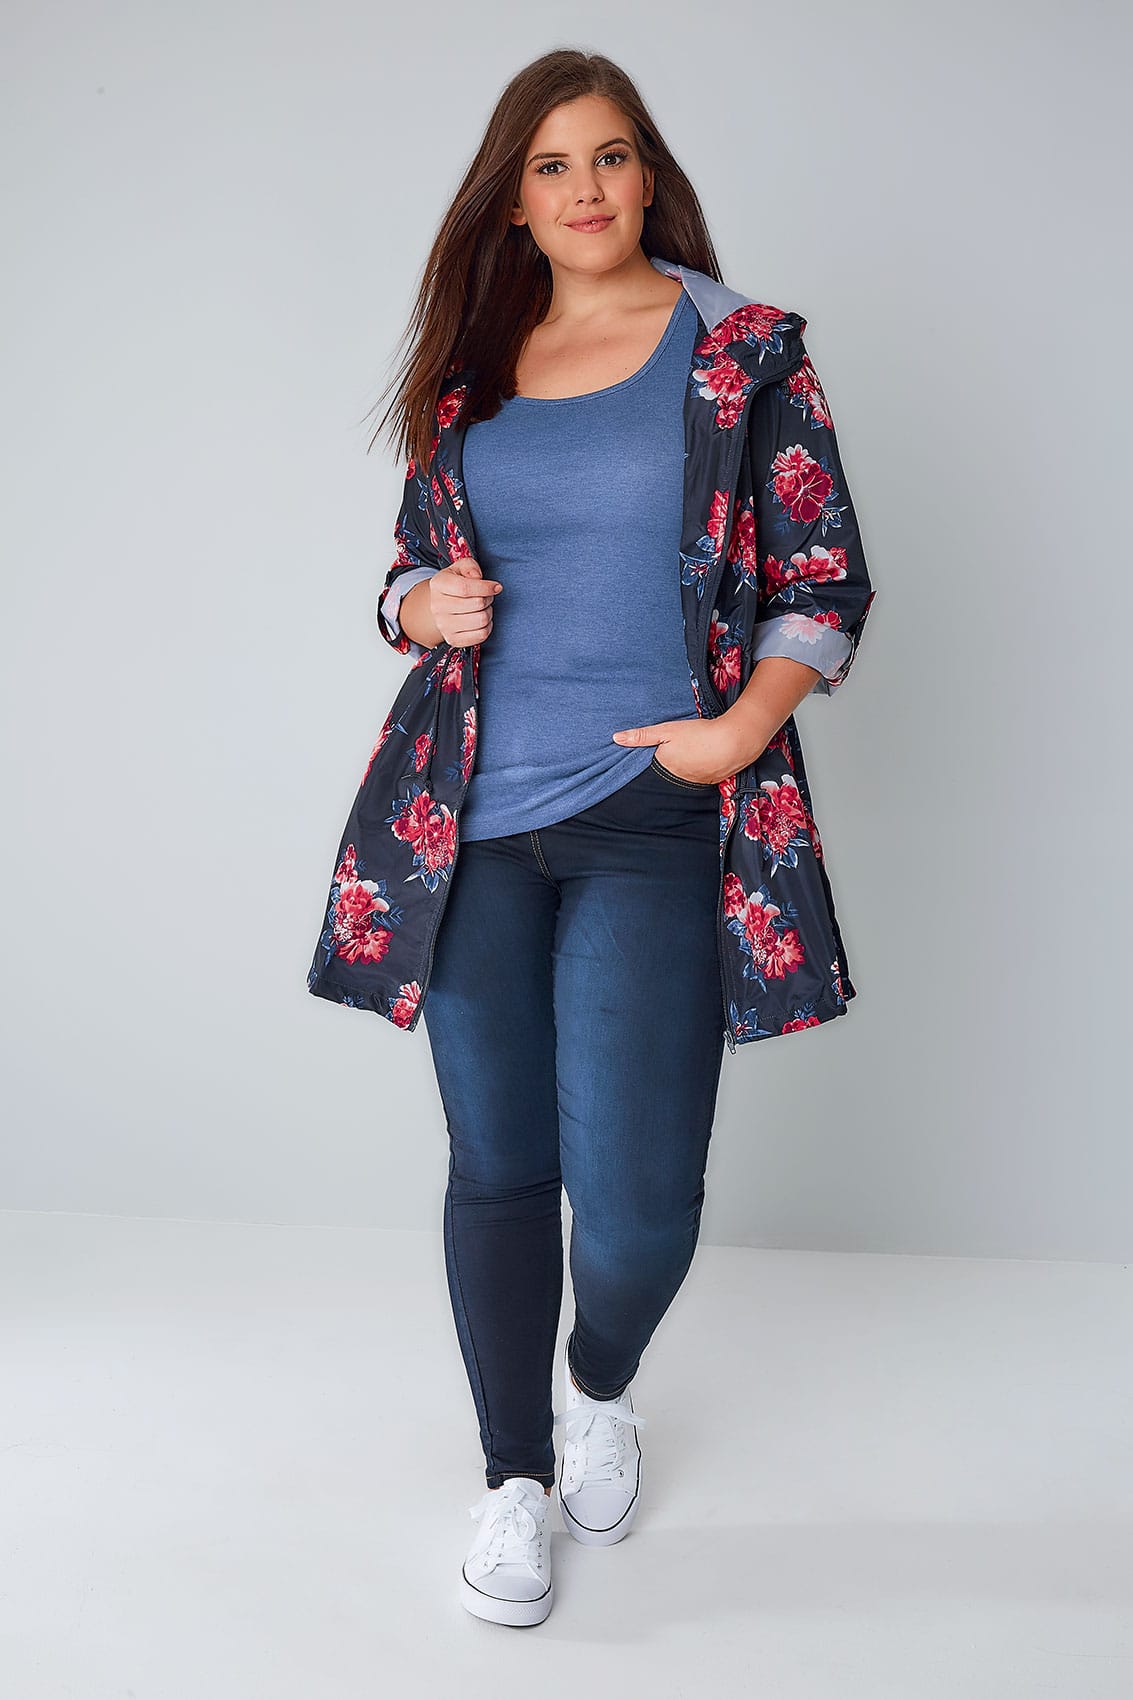 Navy & Multi Floral Print Shower Resistant Parka Jacket With Hood, Plus size 16 to 36 3